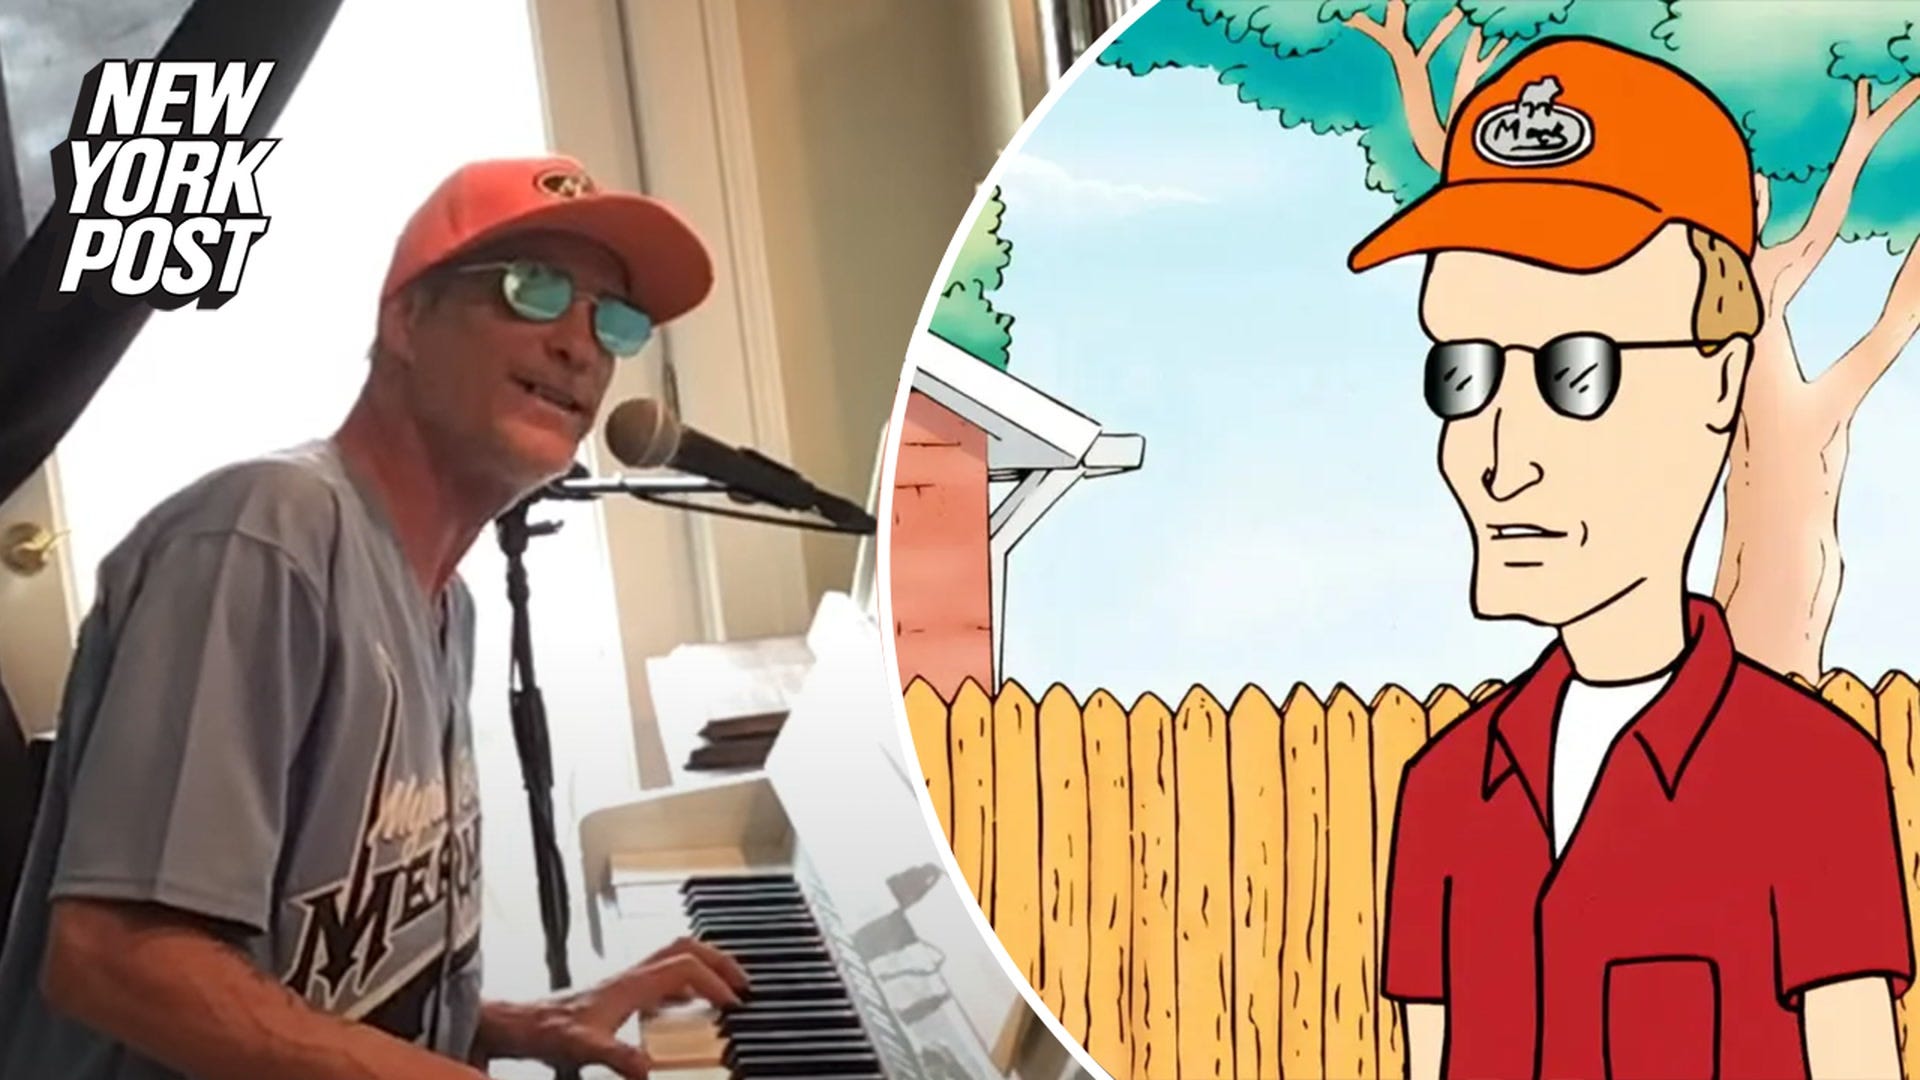 King Of The Hill' Dale Voice Actor Johnny Hardwick Dead At 64